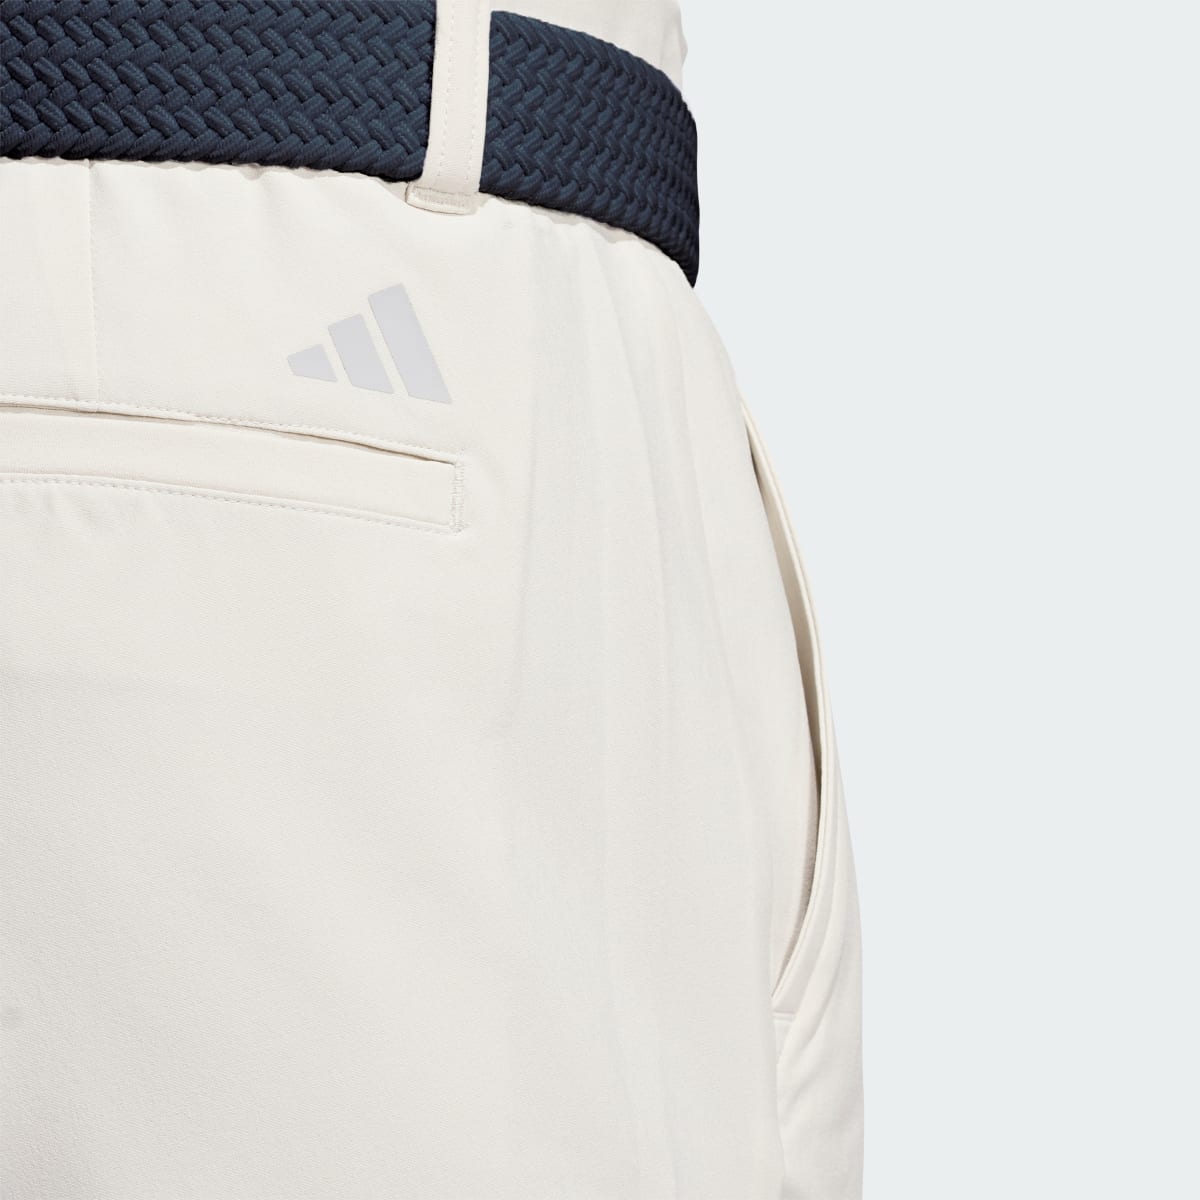 Adidas Ultimate365 Tapered Golf Pants. 6